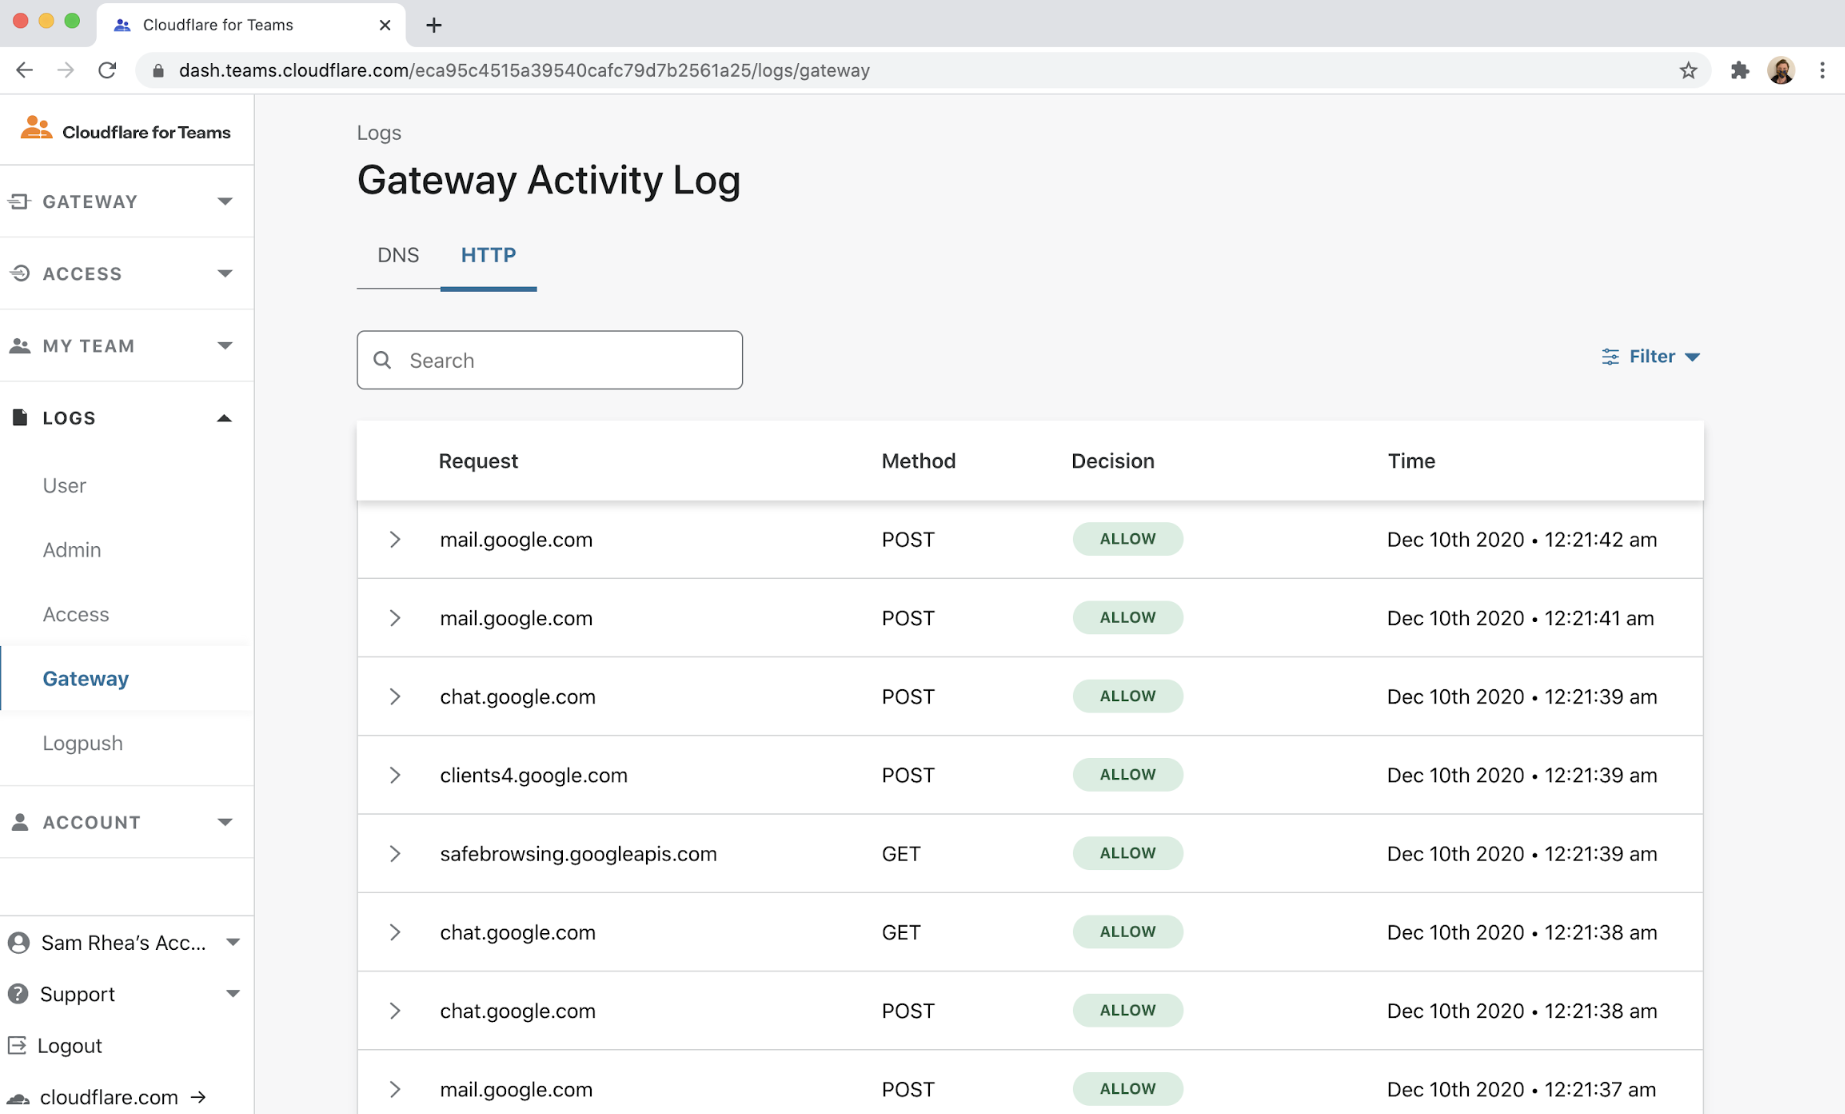 In addition to filtering, Cloudflare Gateway also logs every request and connection made from a device. With Gateway running, your organization can audit how employees use SaaS applications like Salesforce, Office 365, and Workday.